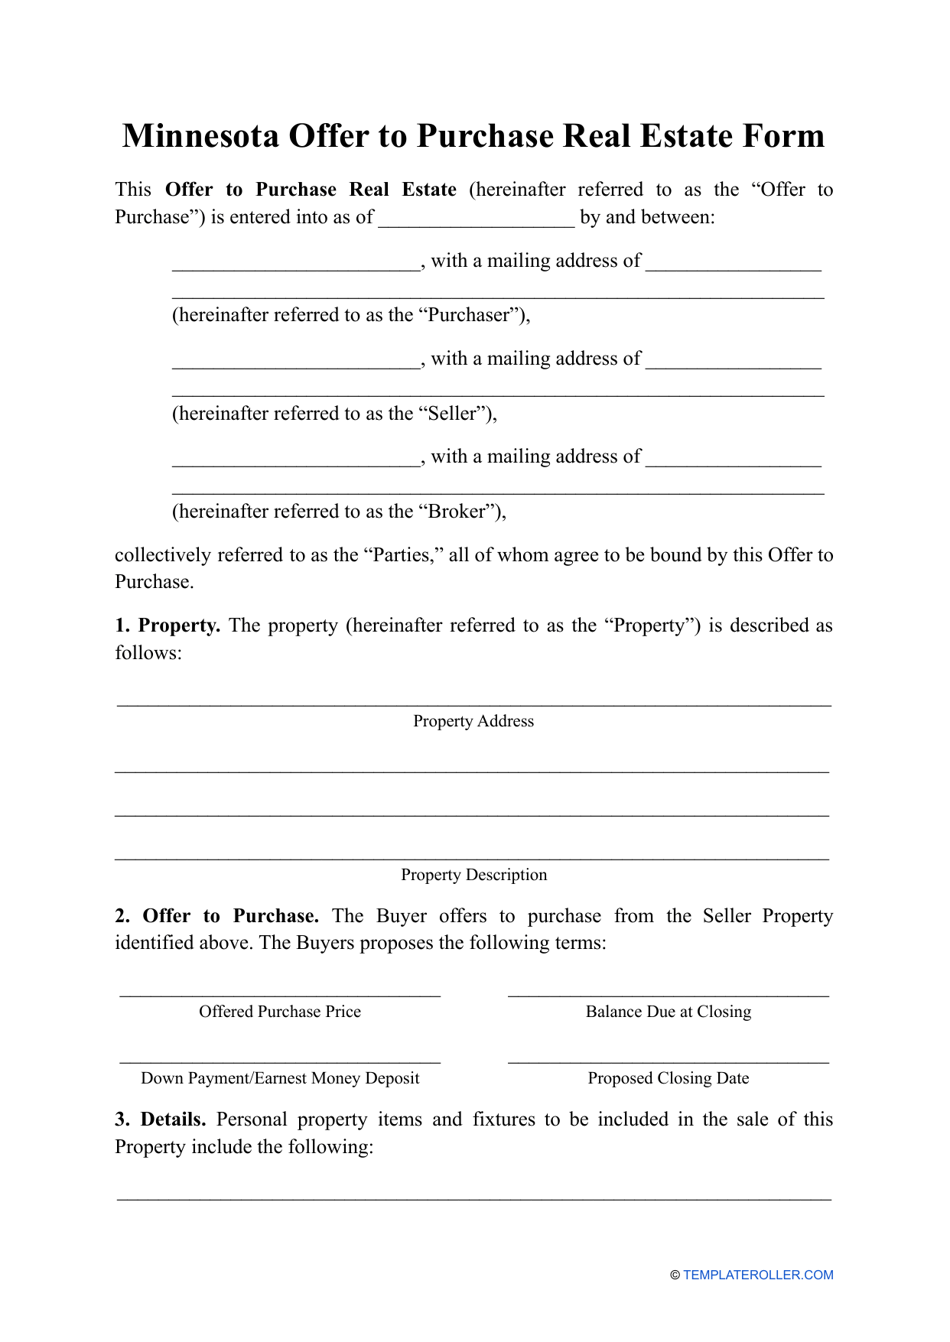 Offer to Purchase Real Estate Form - Minnesota, Page 1